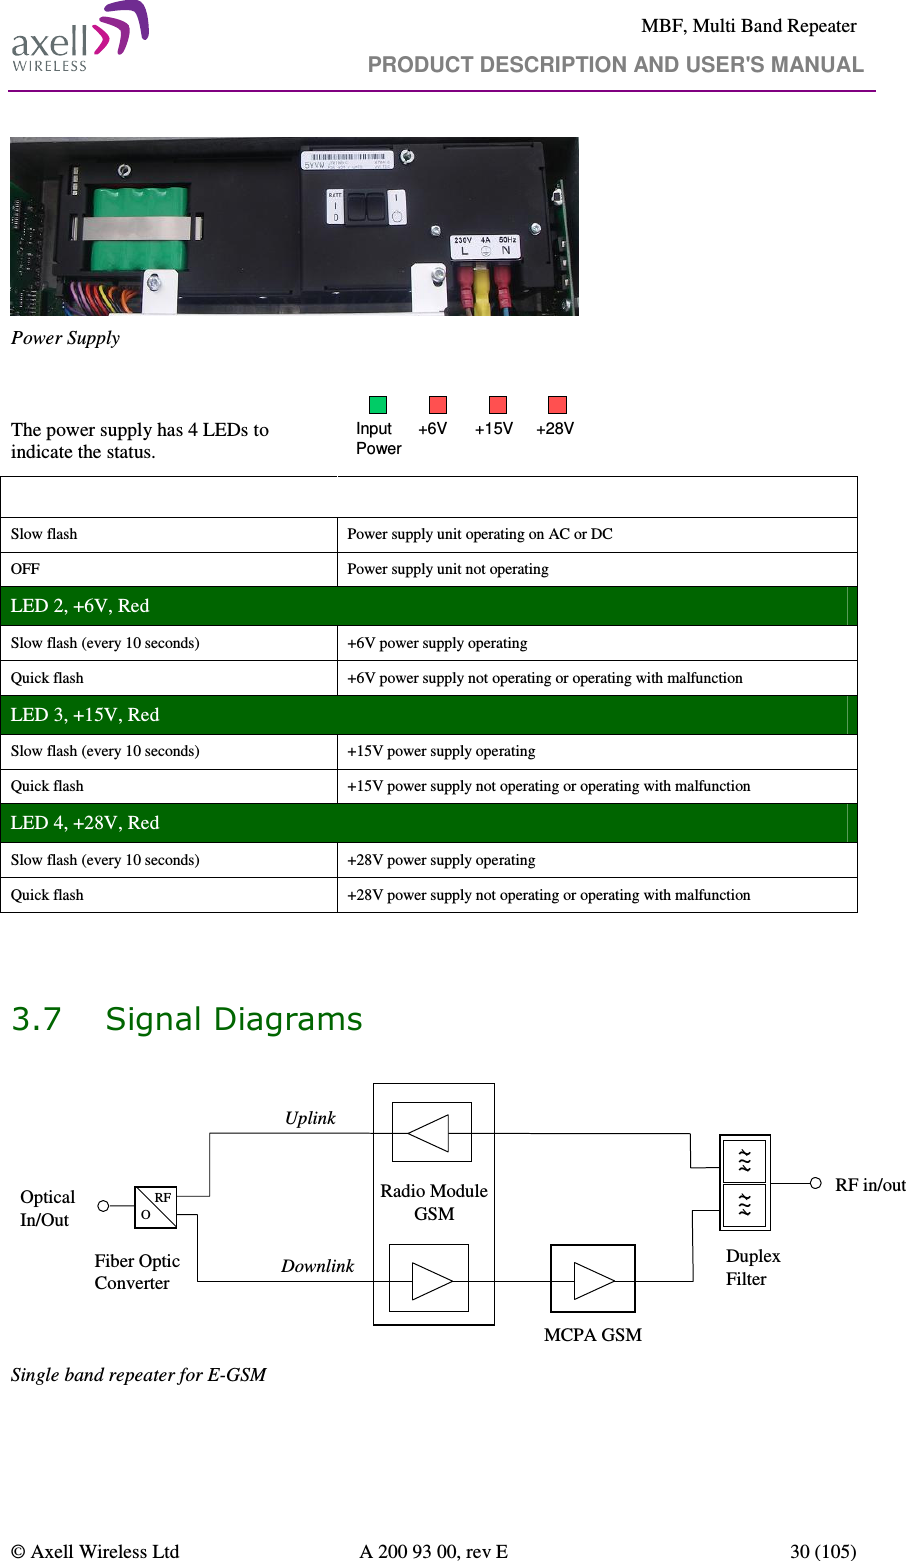     MBF, Multi Band Repeater                                     PRODUCT DESCRIPTION AND USER&apos;S MANUAL   © Axell Wireless Ltd  A 200 93 00, rev E  30 (105)   Power Supply  The power supply has 4 LEDs to indicate the status. Input Power+6V +15V +28V LED 1, Input Power, Green  Slow flash  Power supply unit operating on AC or DC OFF  Power supply unit not operating LED 2, +6V, Red Slow flash (every 10 seconds)  +6V power supply operating Quick flash  +6V power supply not operating or operating with malfunction LED 3, +15V, Red  Slow flash (every 10 seconds)  +15V power supply operating Quick flash  +15V power supply not operating or operating with malfunction LED 4, +28V, Red Slow flash (every 10 seconds)  +28V power supply operating Quick flash  +28V power supply not operating or operating with malfunction   3.7 Signal Diagrams   Duplex FilterRFOOpticalIn/OutDownlinkRF in/outFiber OpticConverterRadio Module GSMMCPA GSMUplink~~~~~~~~~~~~ Single band repeater for E-GSM  